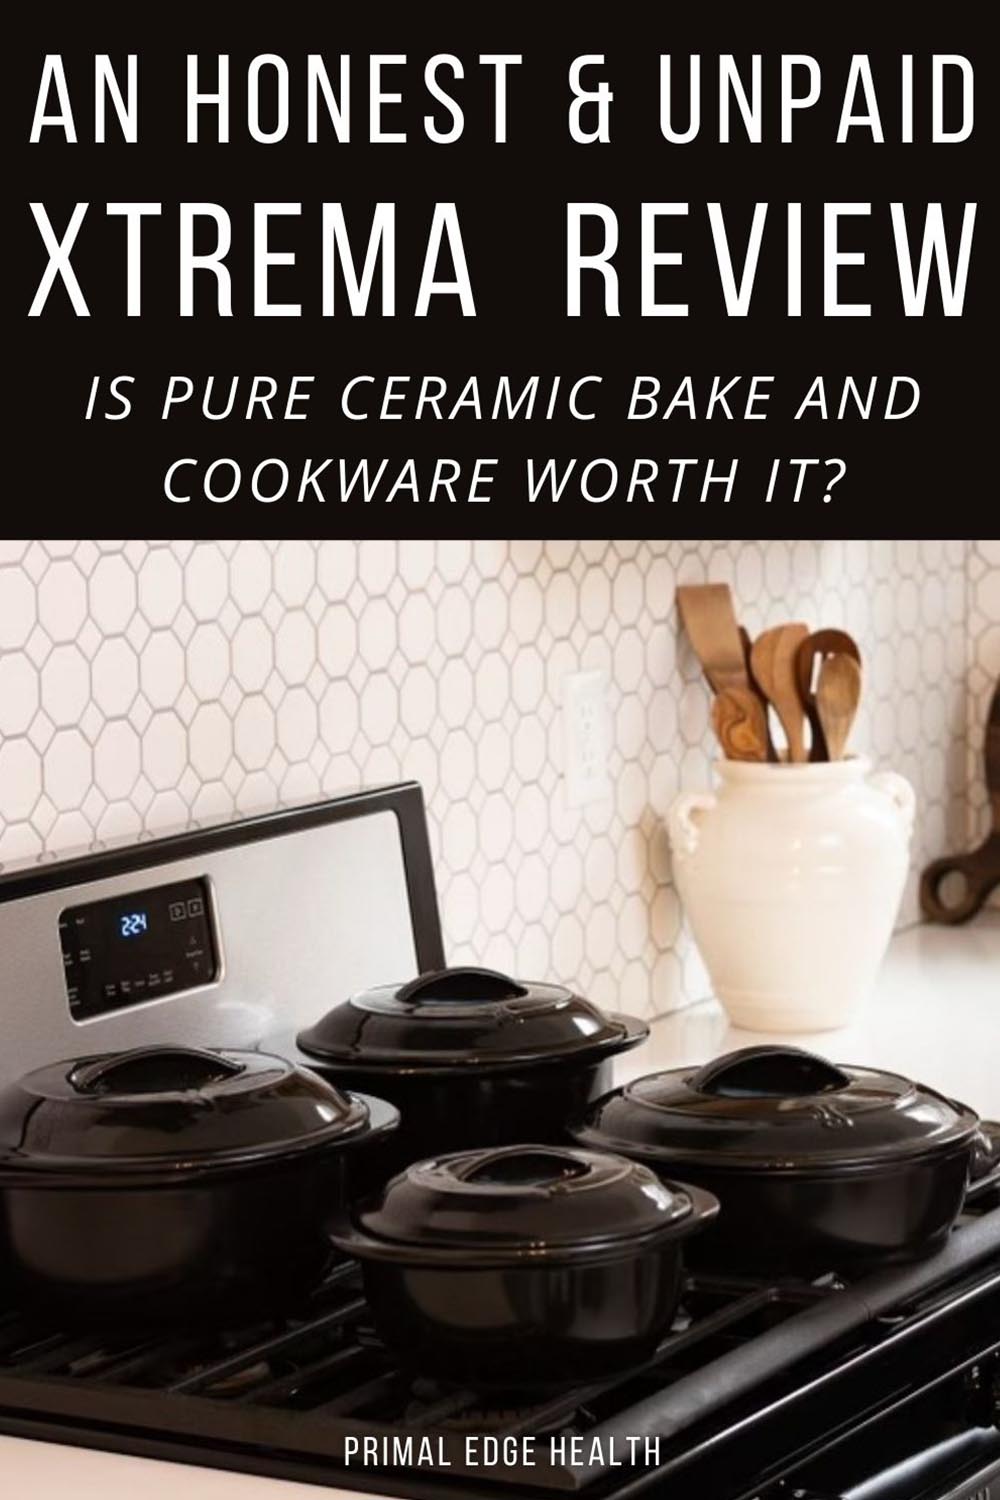 https://www.primaledgehealth.com/wp-content/uploads/2021/12/Xtrema-review-PIN.jpg